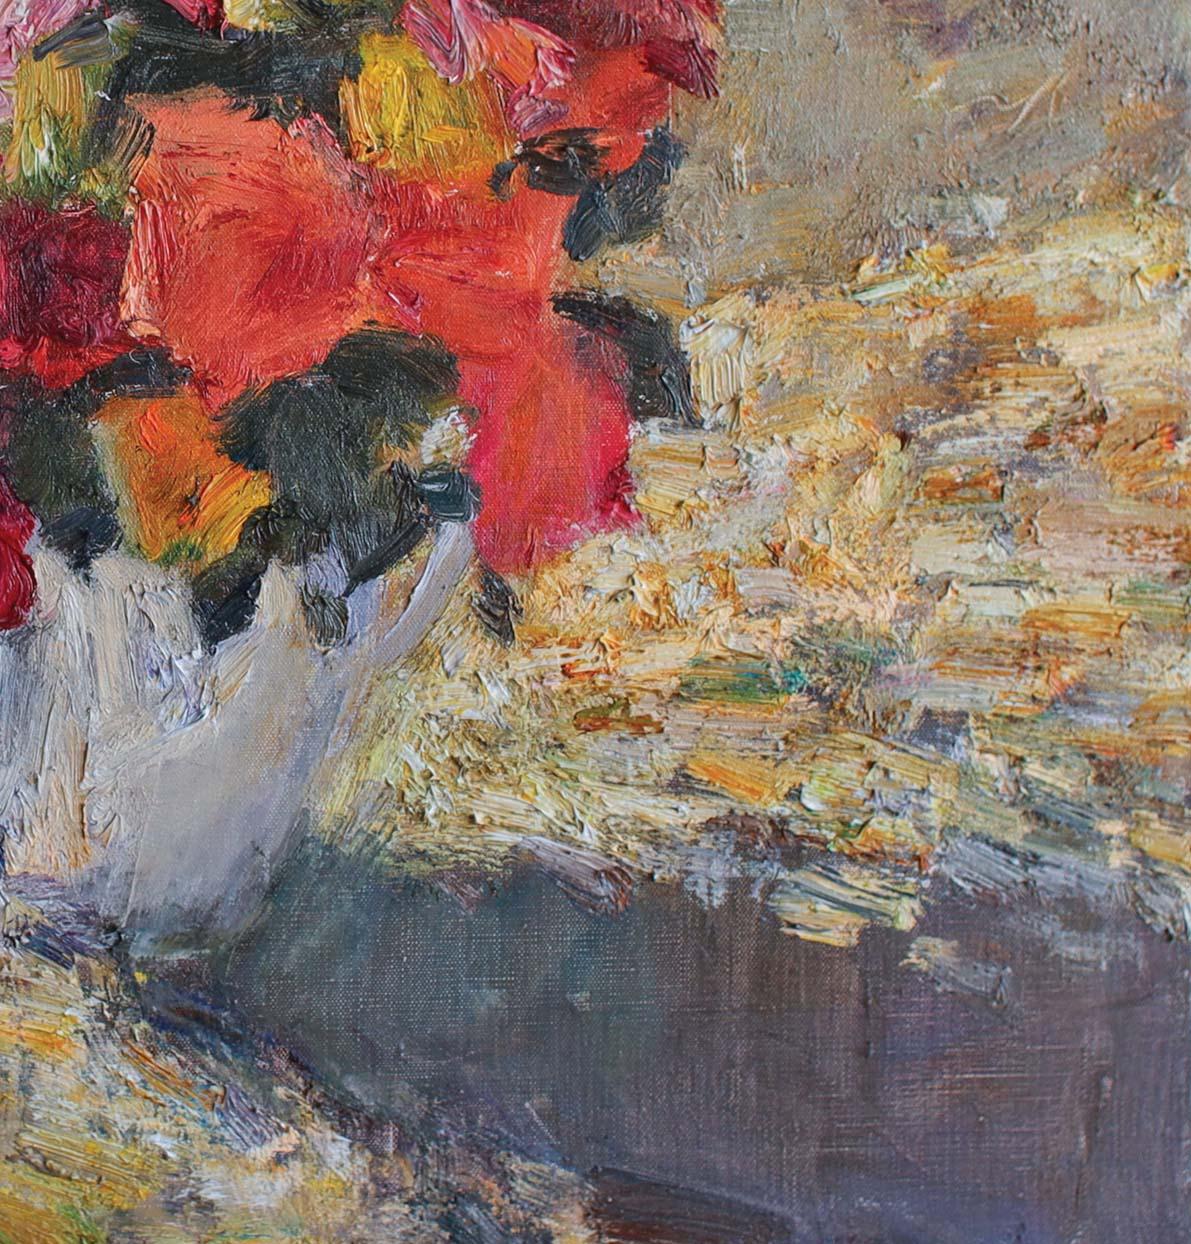 Roses on the Shore - Gray Landscape Painting by Roman Konstantinov